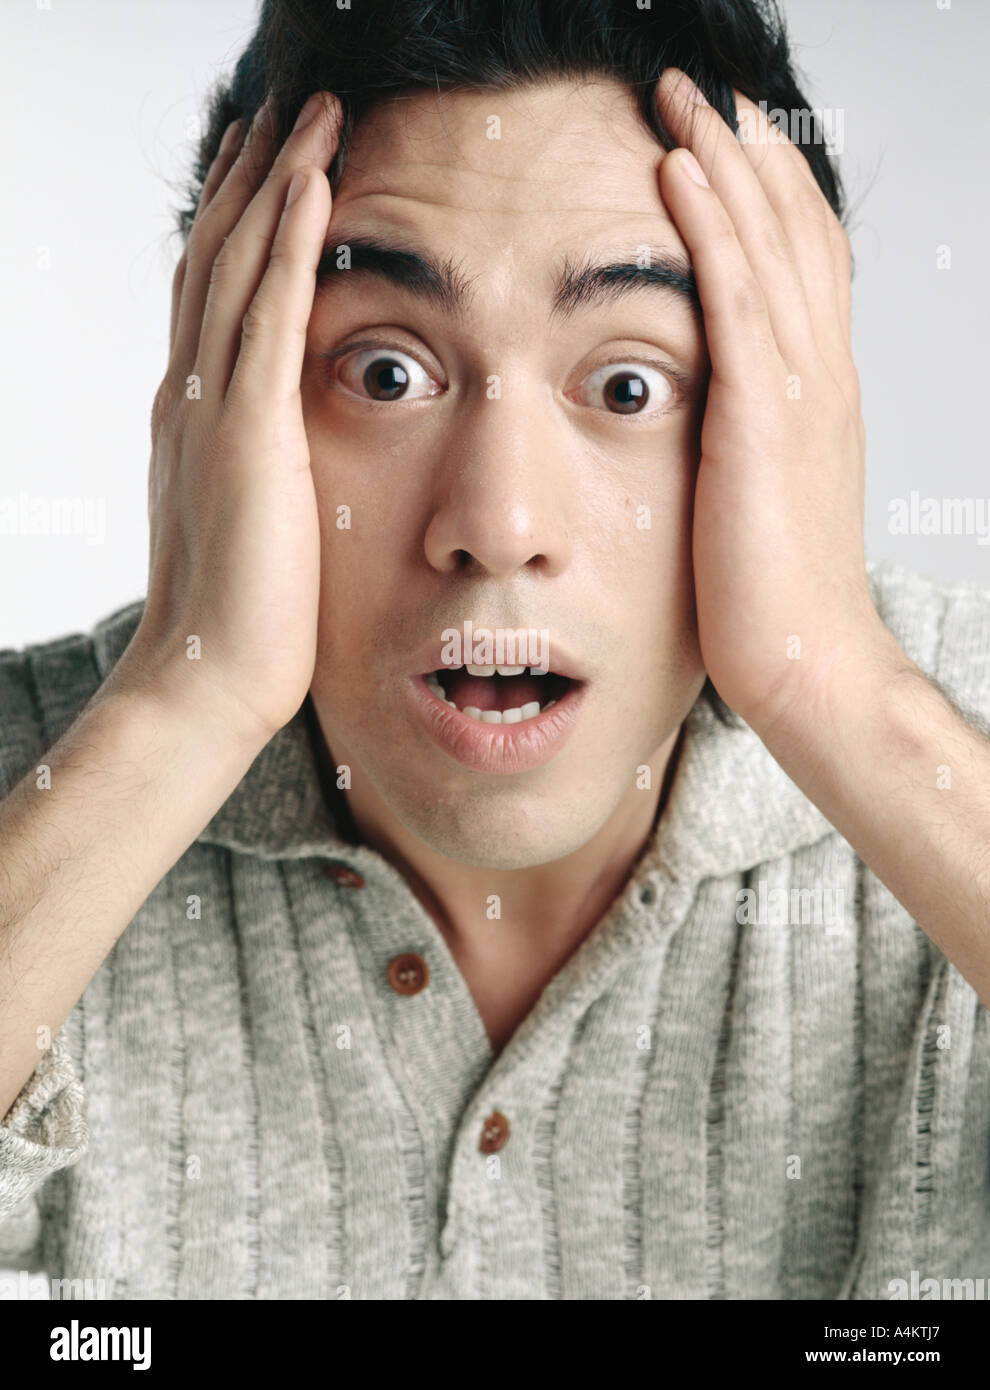 Man looking at camera with eyes wide open and eyebrows raised, holding face with hands Stock Photo